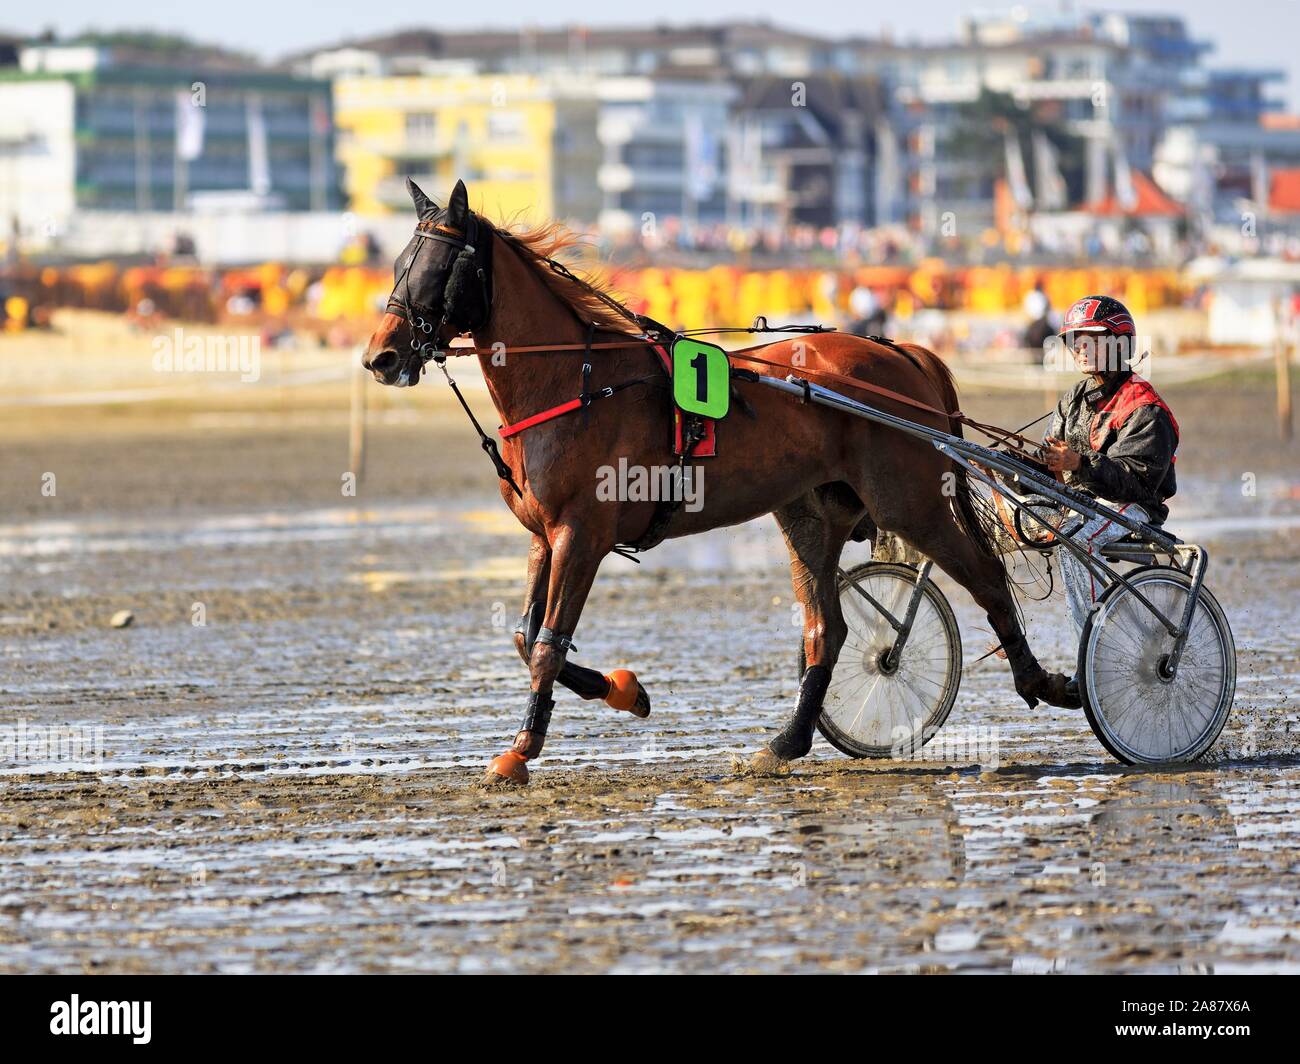 Horse and rider in Sulky, Trotter, Duhne mudflat race, Cuxhaven, Lower Saxony, Germany Stock Photo